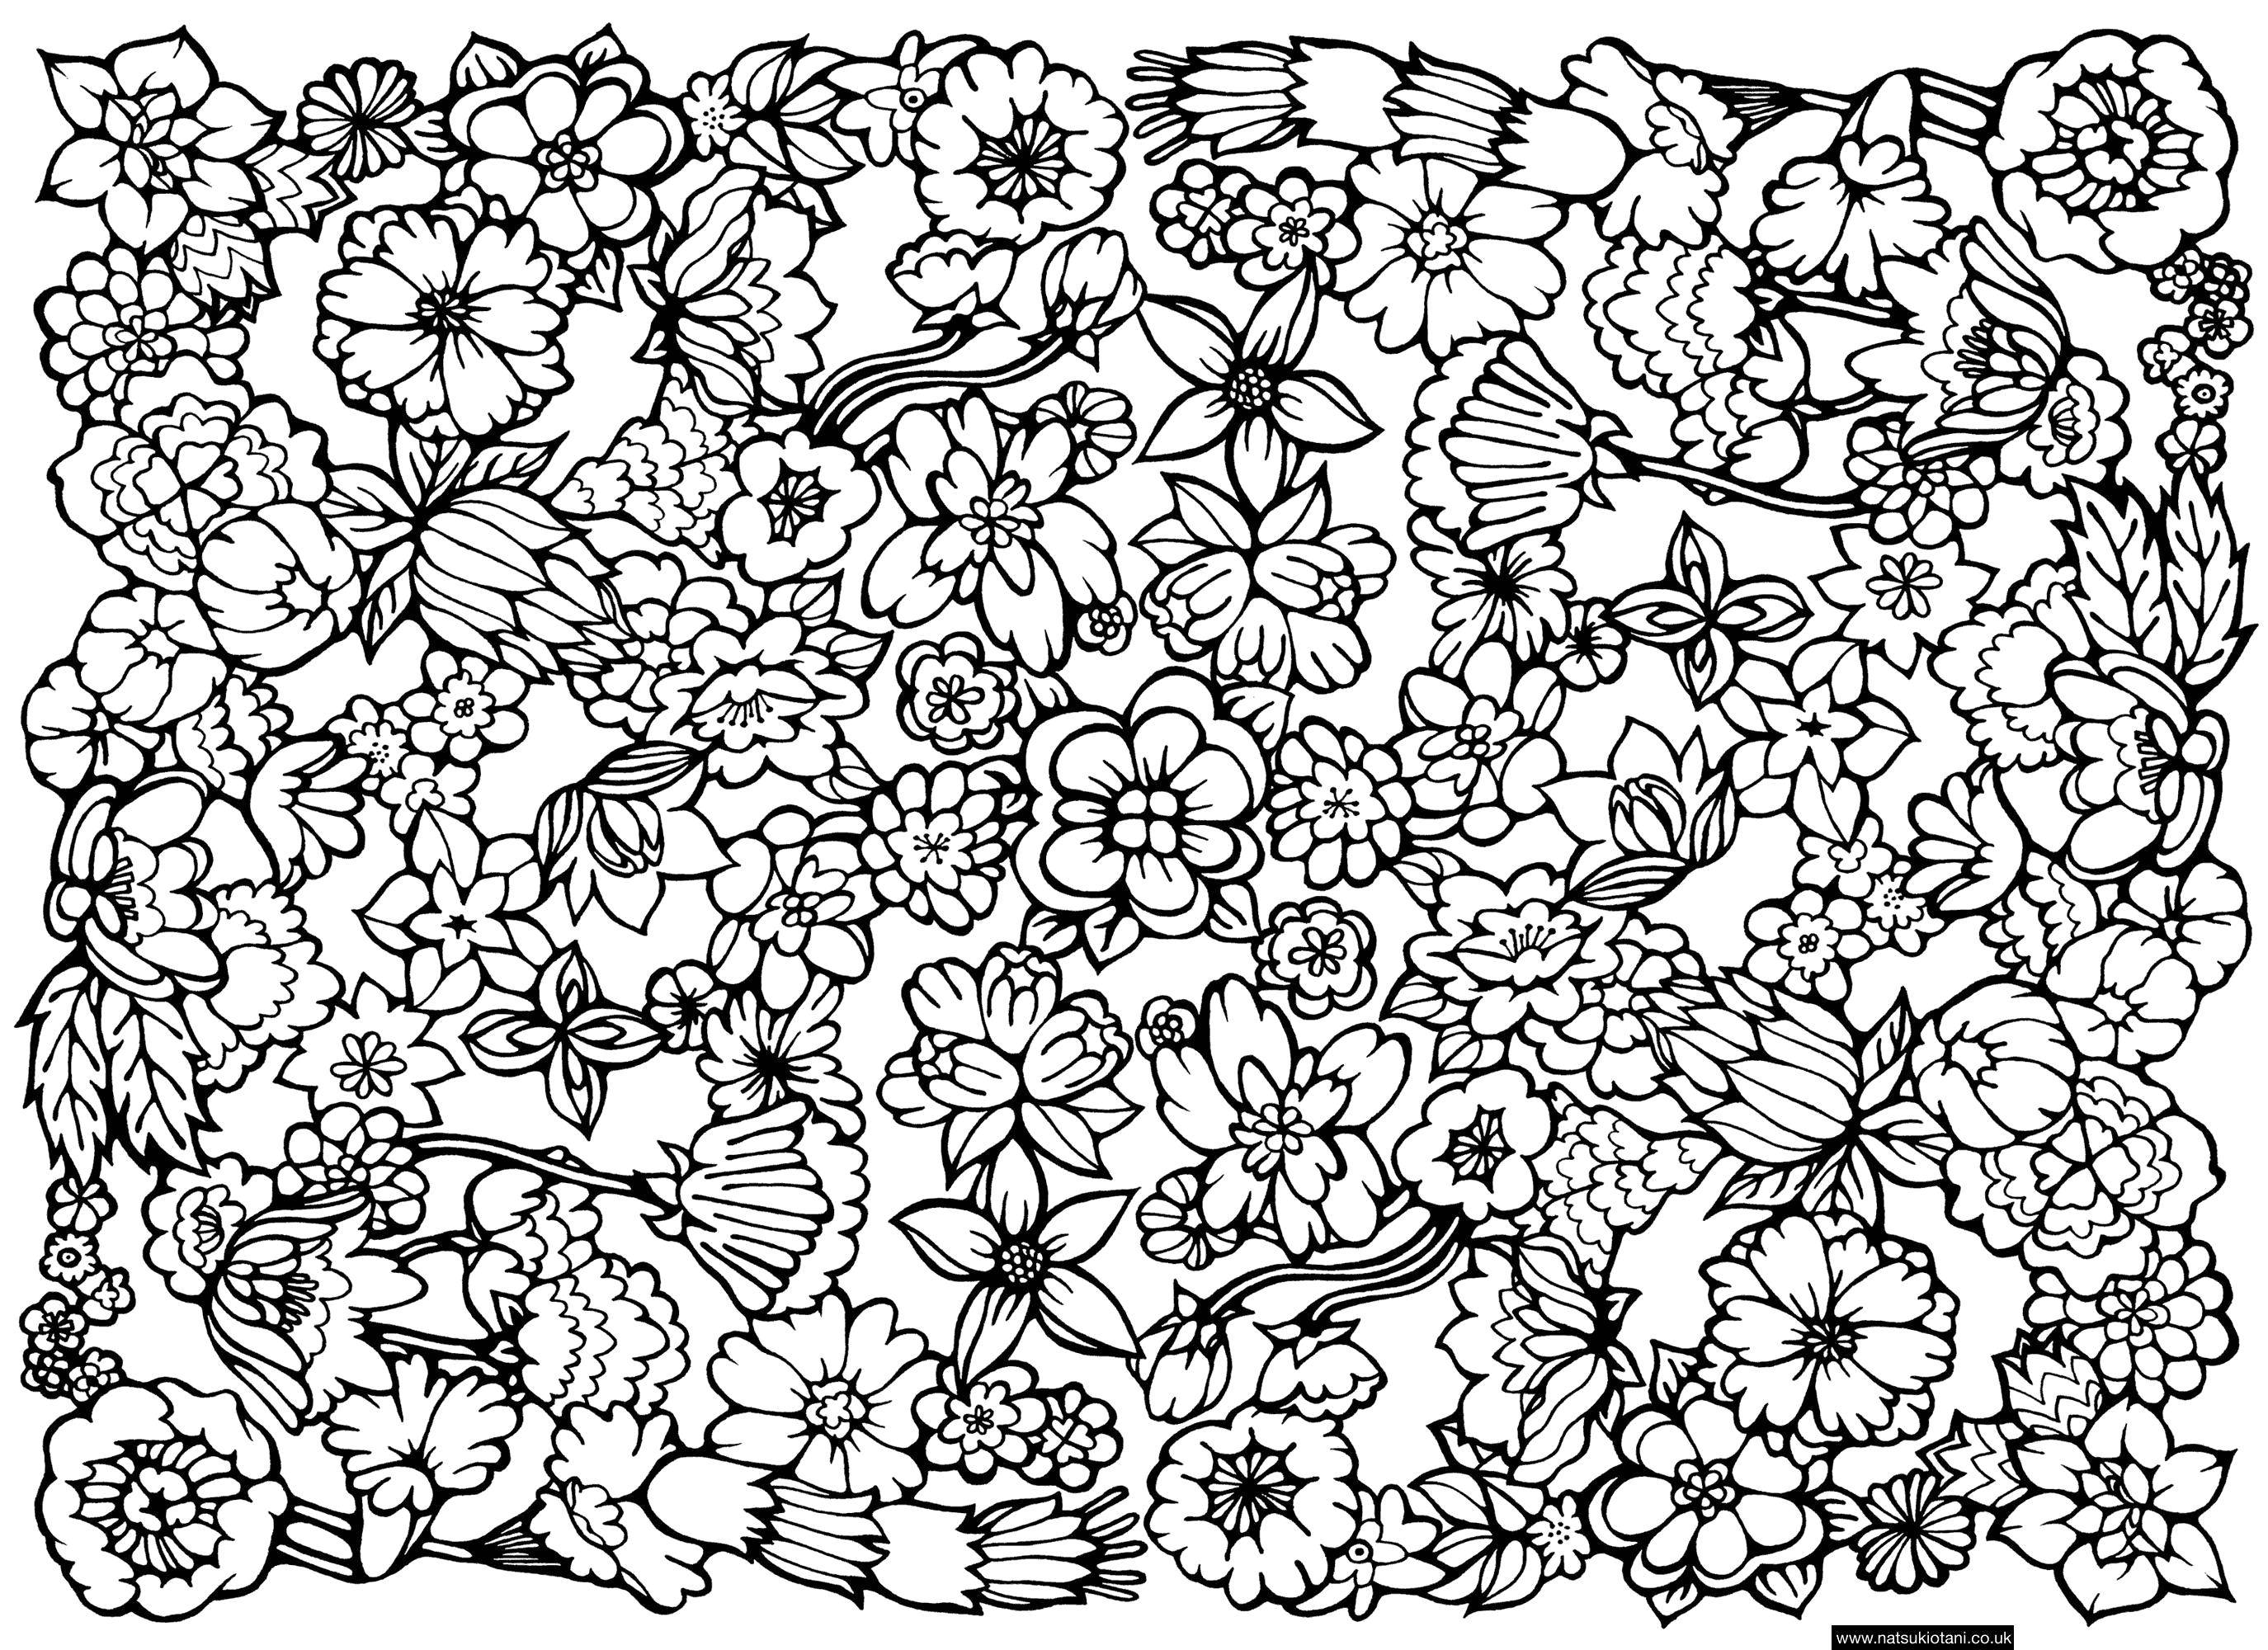 Coloring The pattern of many colors. Category Patterns with flowers. Tags:  Patterns, flower.